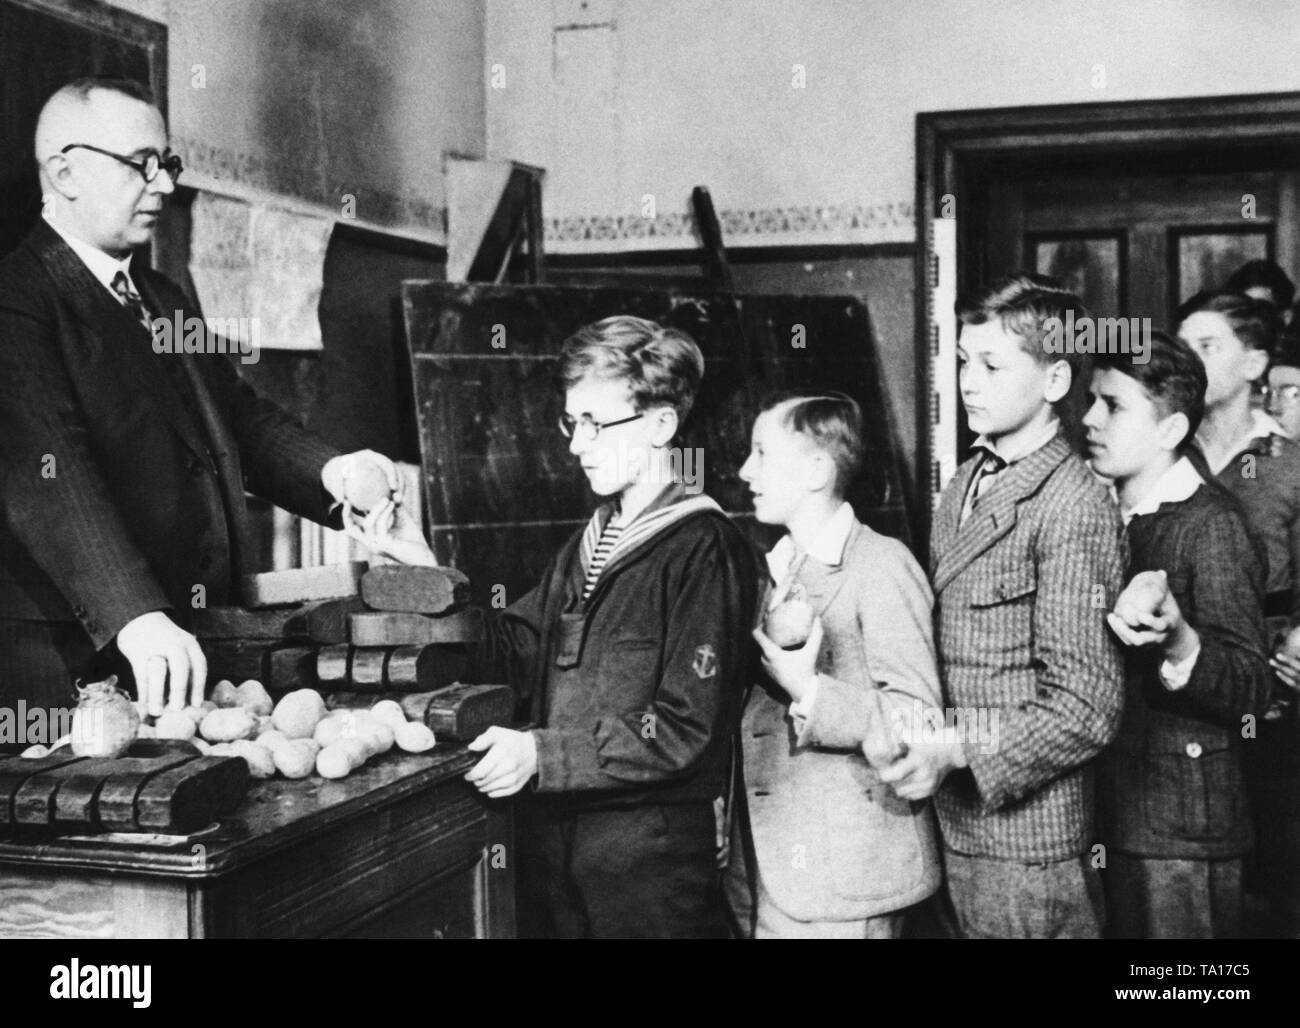 Students from the Kaiser Friedrich School in Berlin bring either a piece of pressed coal or a potato  in the school to help needy families. There the teacher collects these every morning before the class starts. The reason for the collection was the lasting mass unemployment and the plight of the affected families in the winter months of the economic crisis. Without date, probably in 1931. Stock Photo